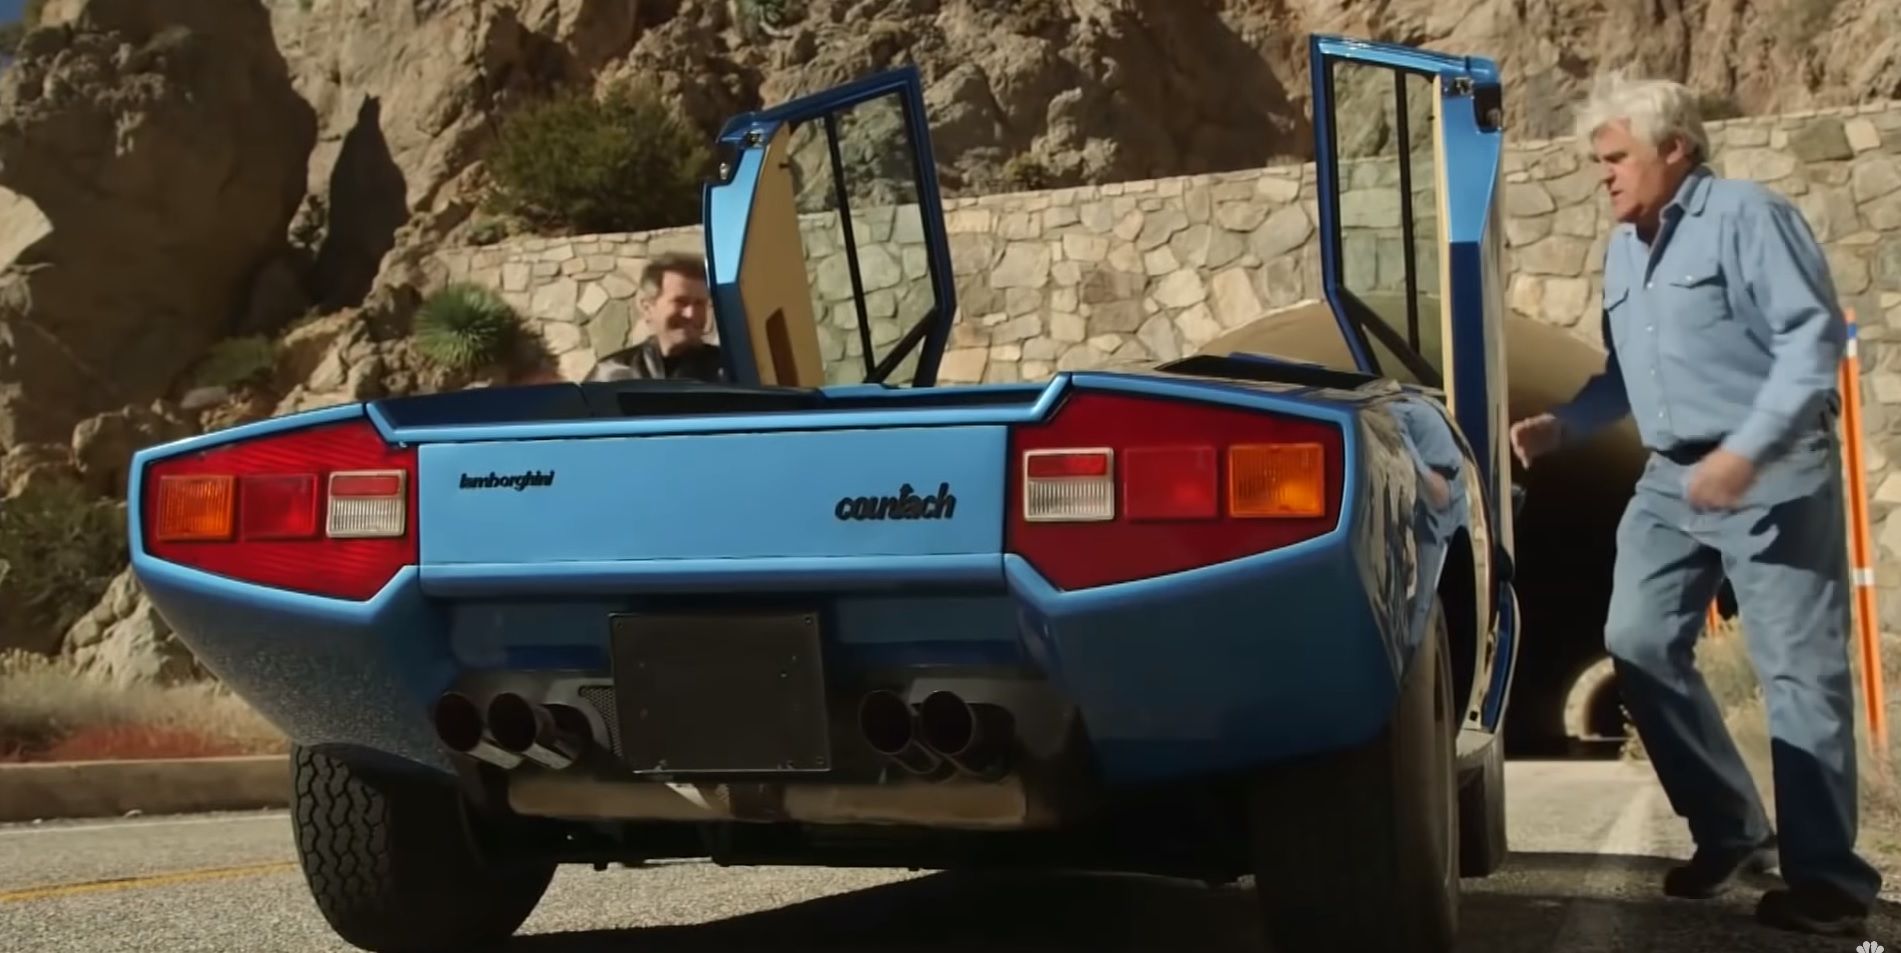 The mighty Countach